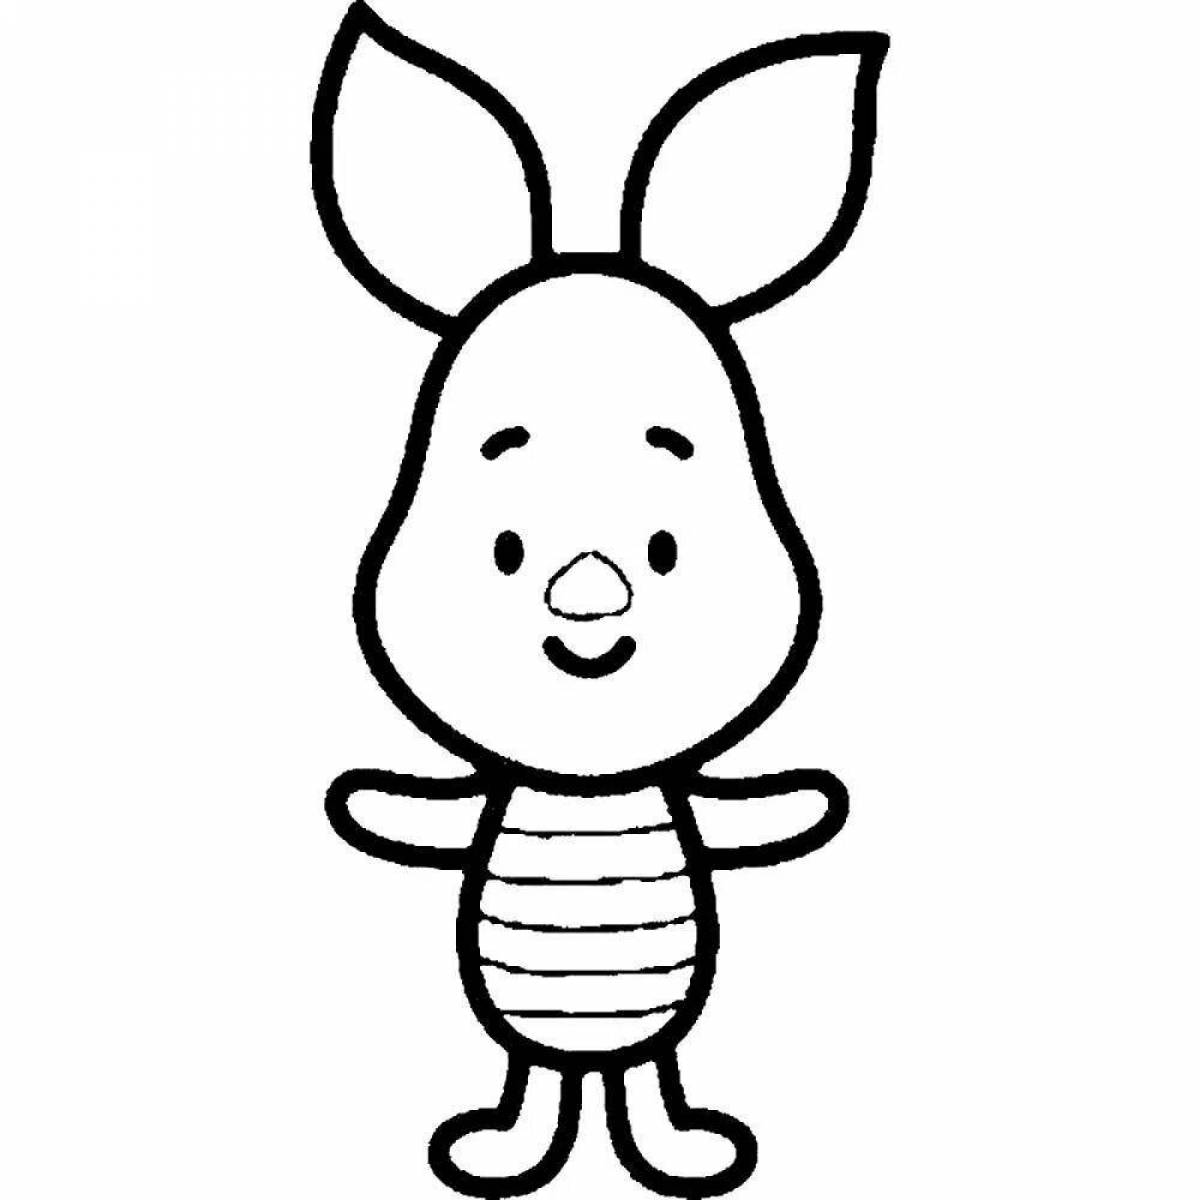 Colored cartoon easy coloring pages